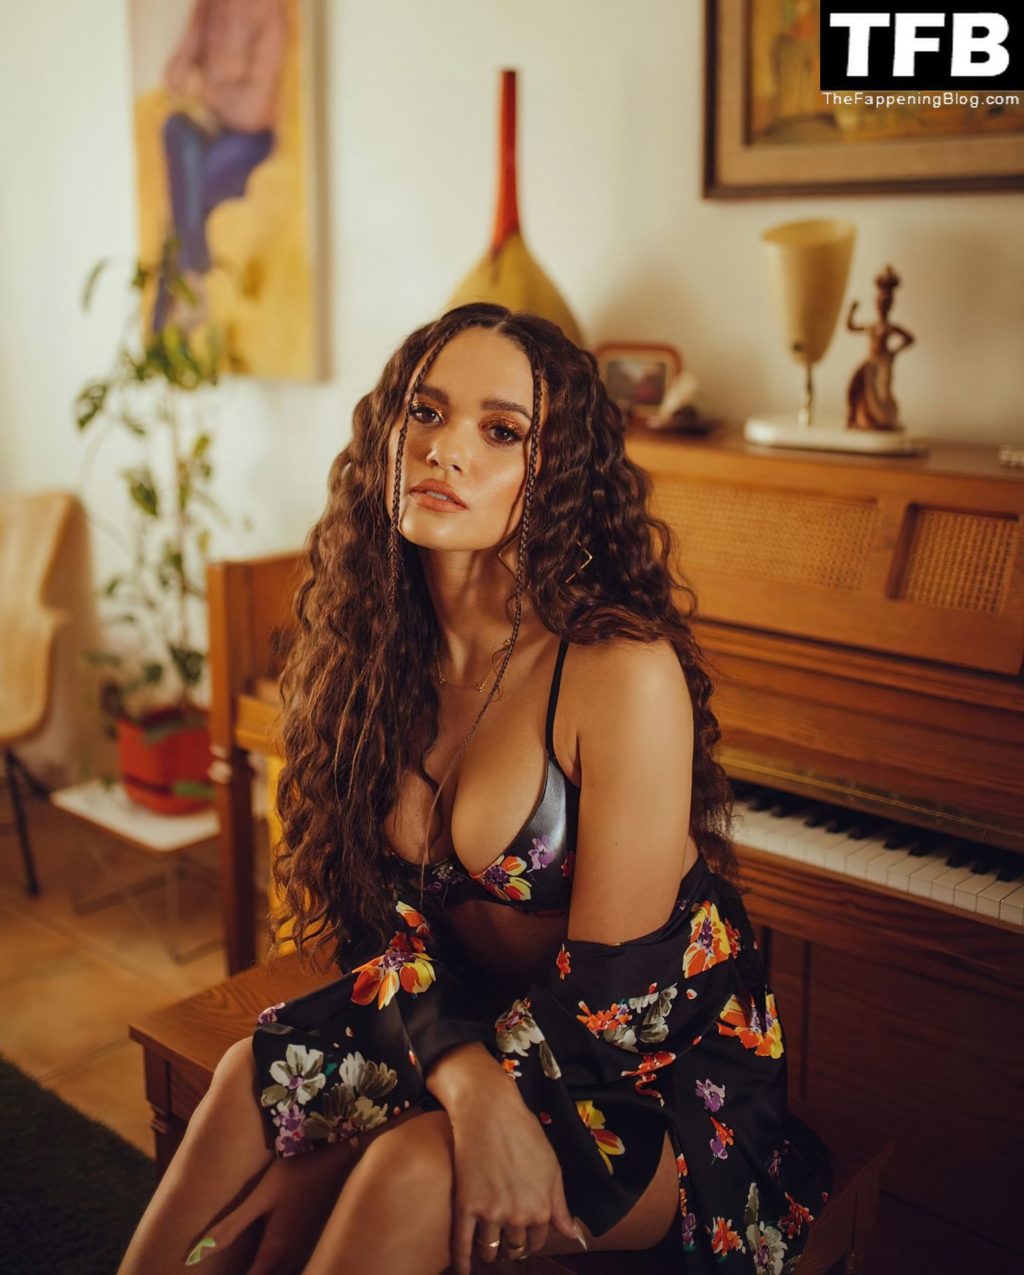 Madison Pettis Sexy Boobs in Lingerie 2 1 thefappeningblog.com  1024x1275 - Madison Pettis Displays Her Gorgeous Body For the Latest Savage x Fenty Campaign (6 Photos)